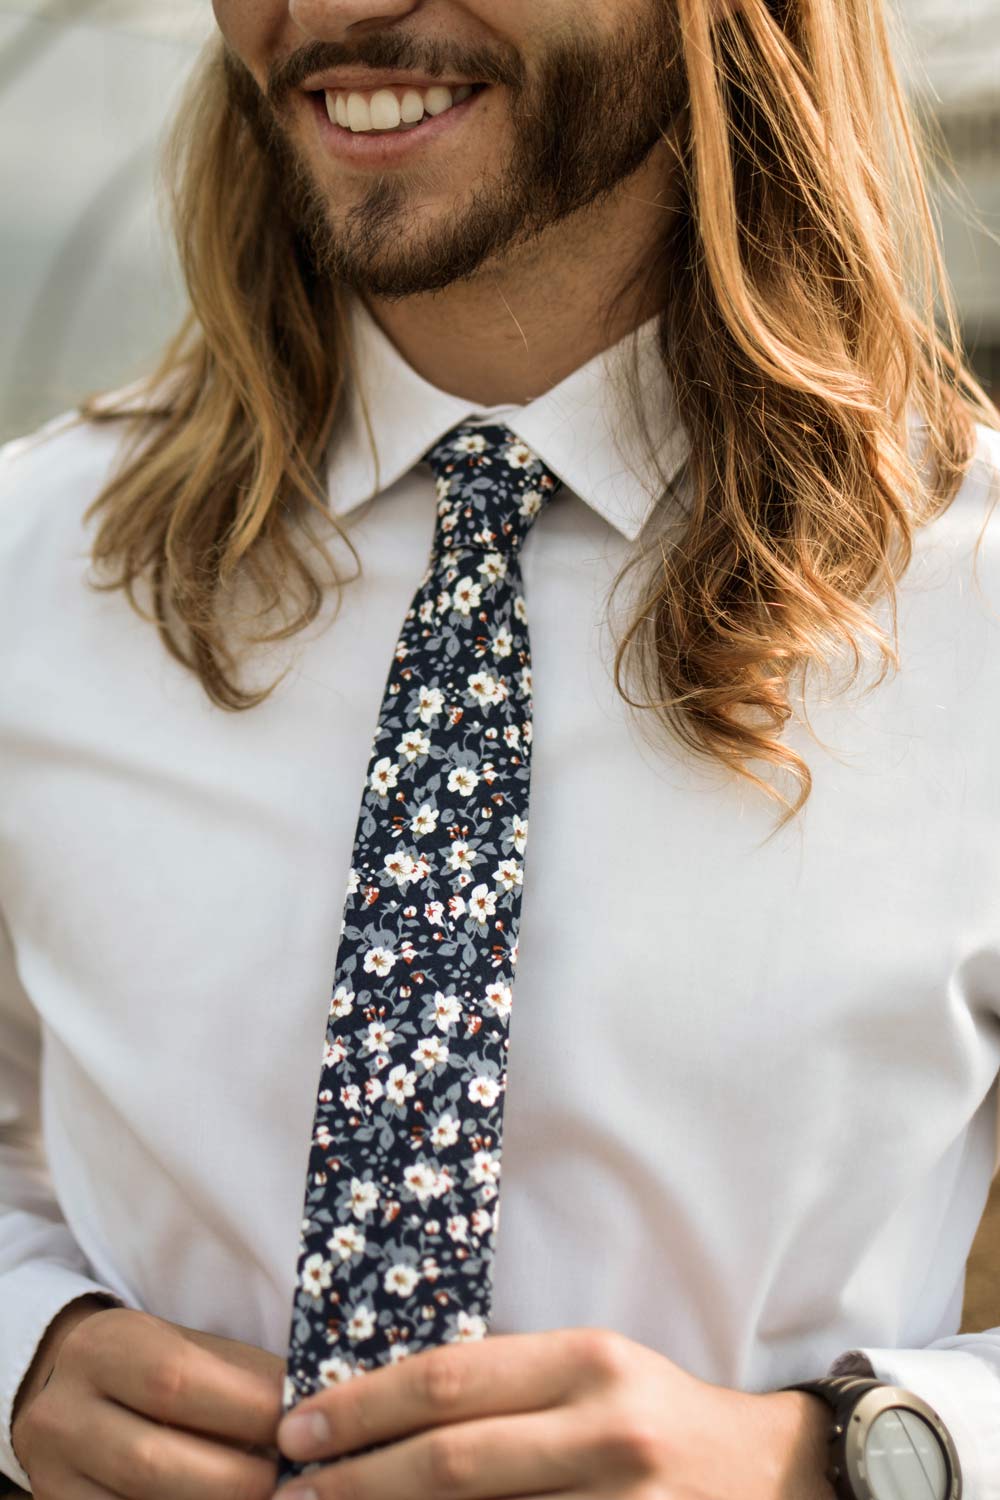 Blueberry Bliss tie worn with white shirt.